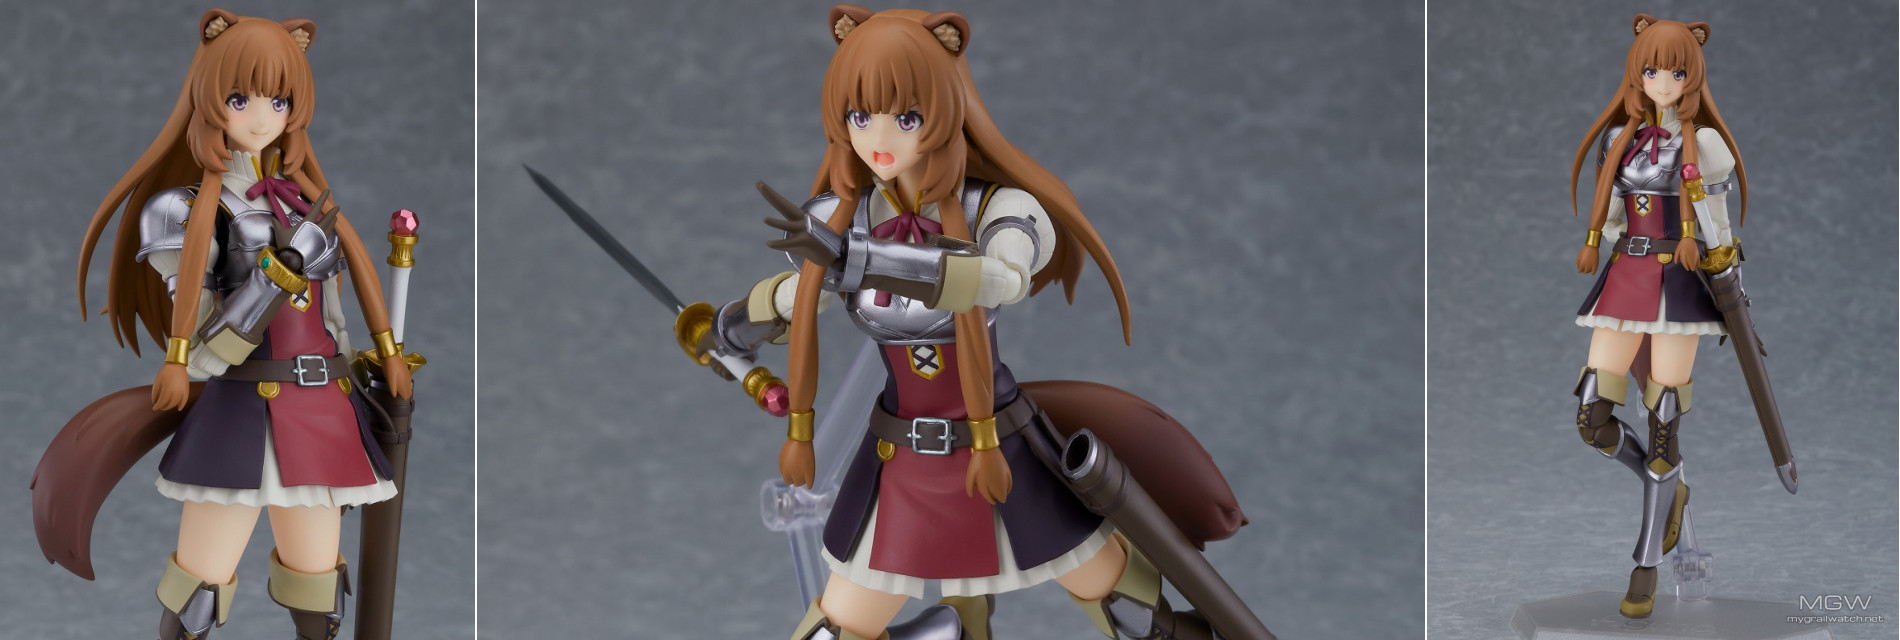 figma Raphtalia by Max Factory from The Rising of the Shield Hero